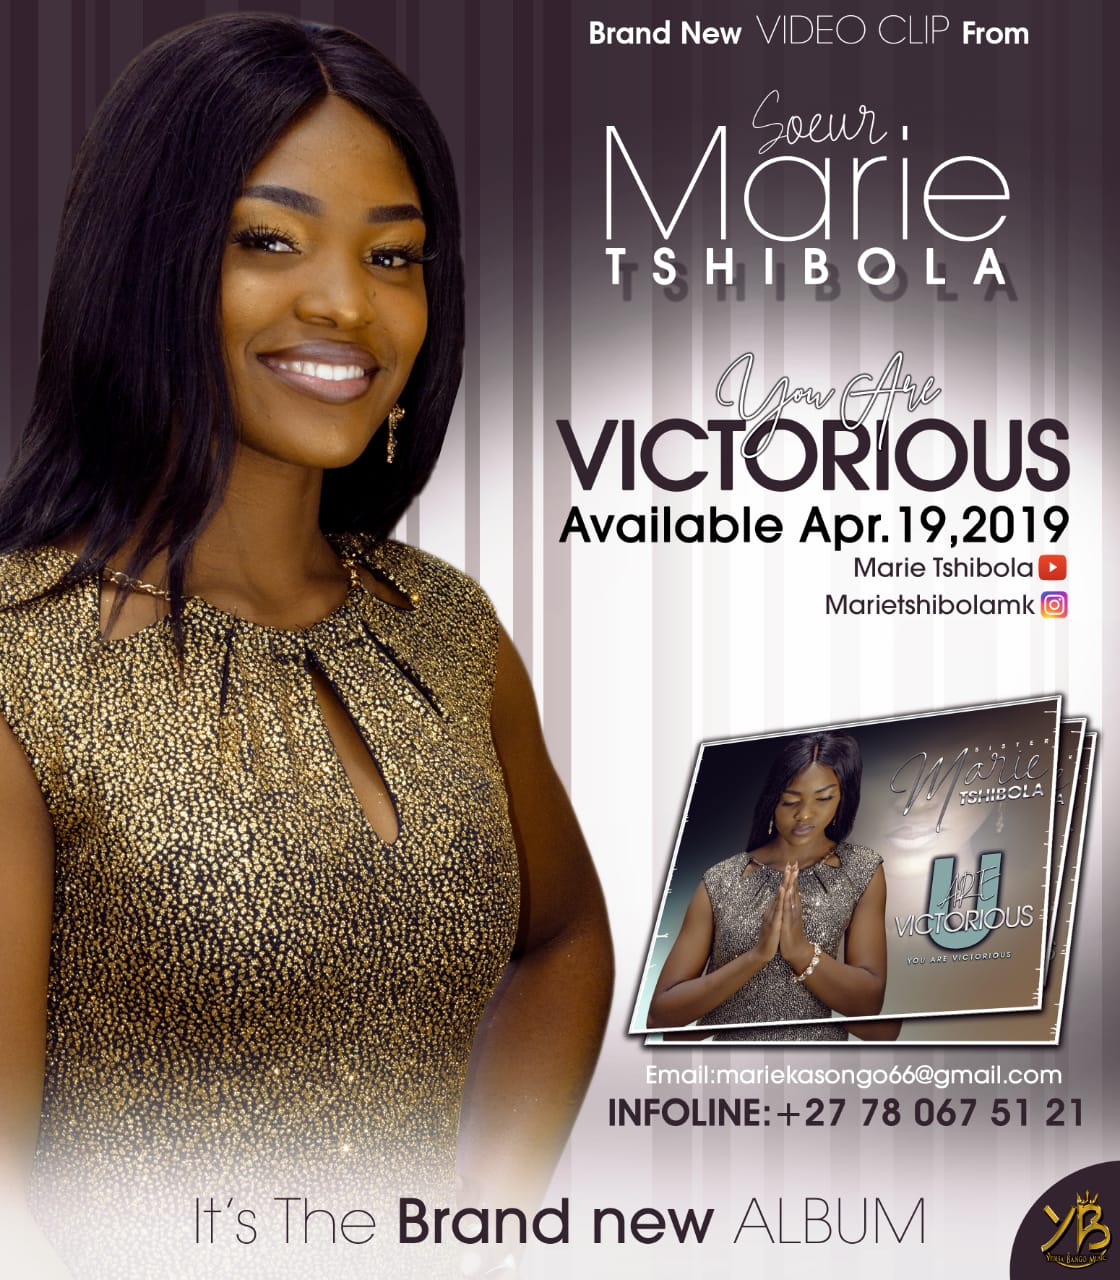 You are Victorious (Marie Tshibola) Lyrics